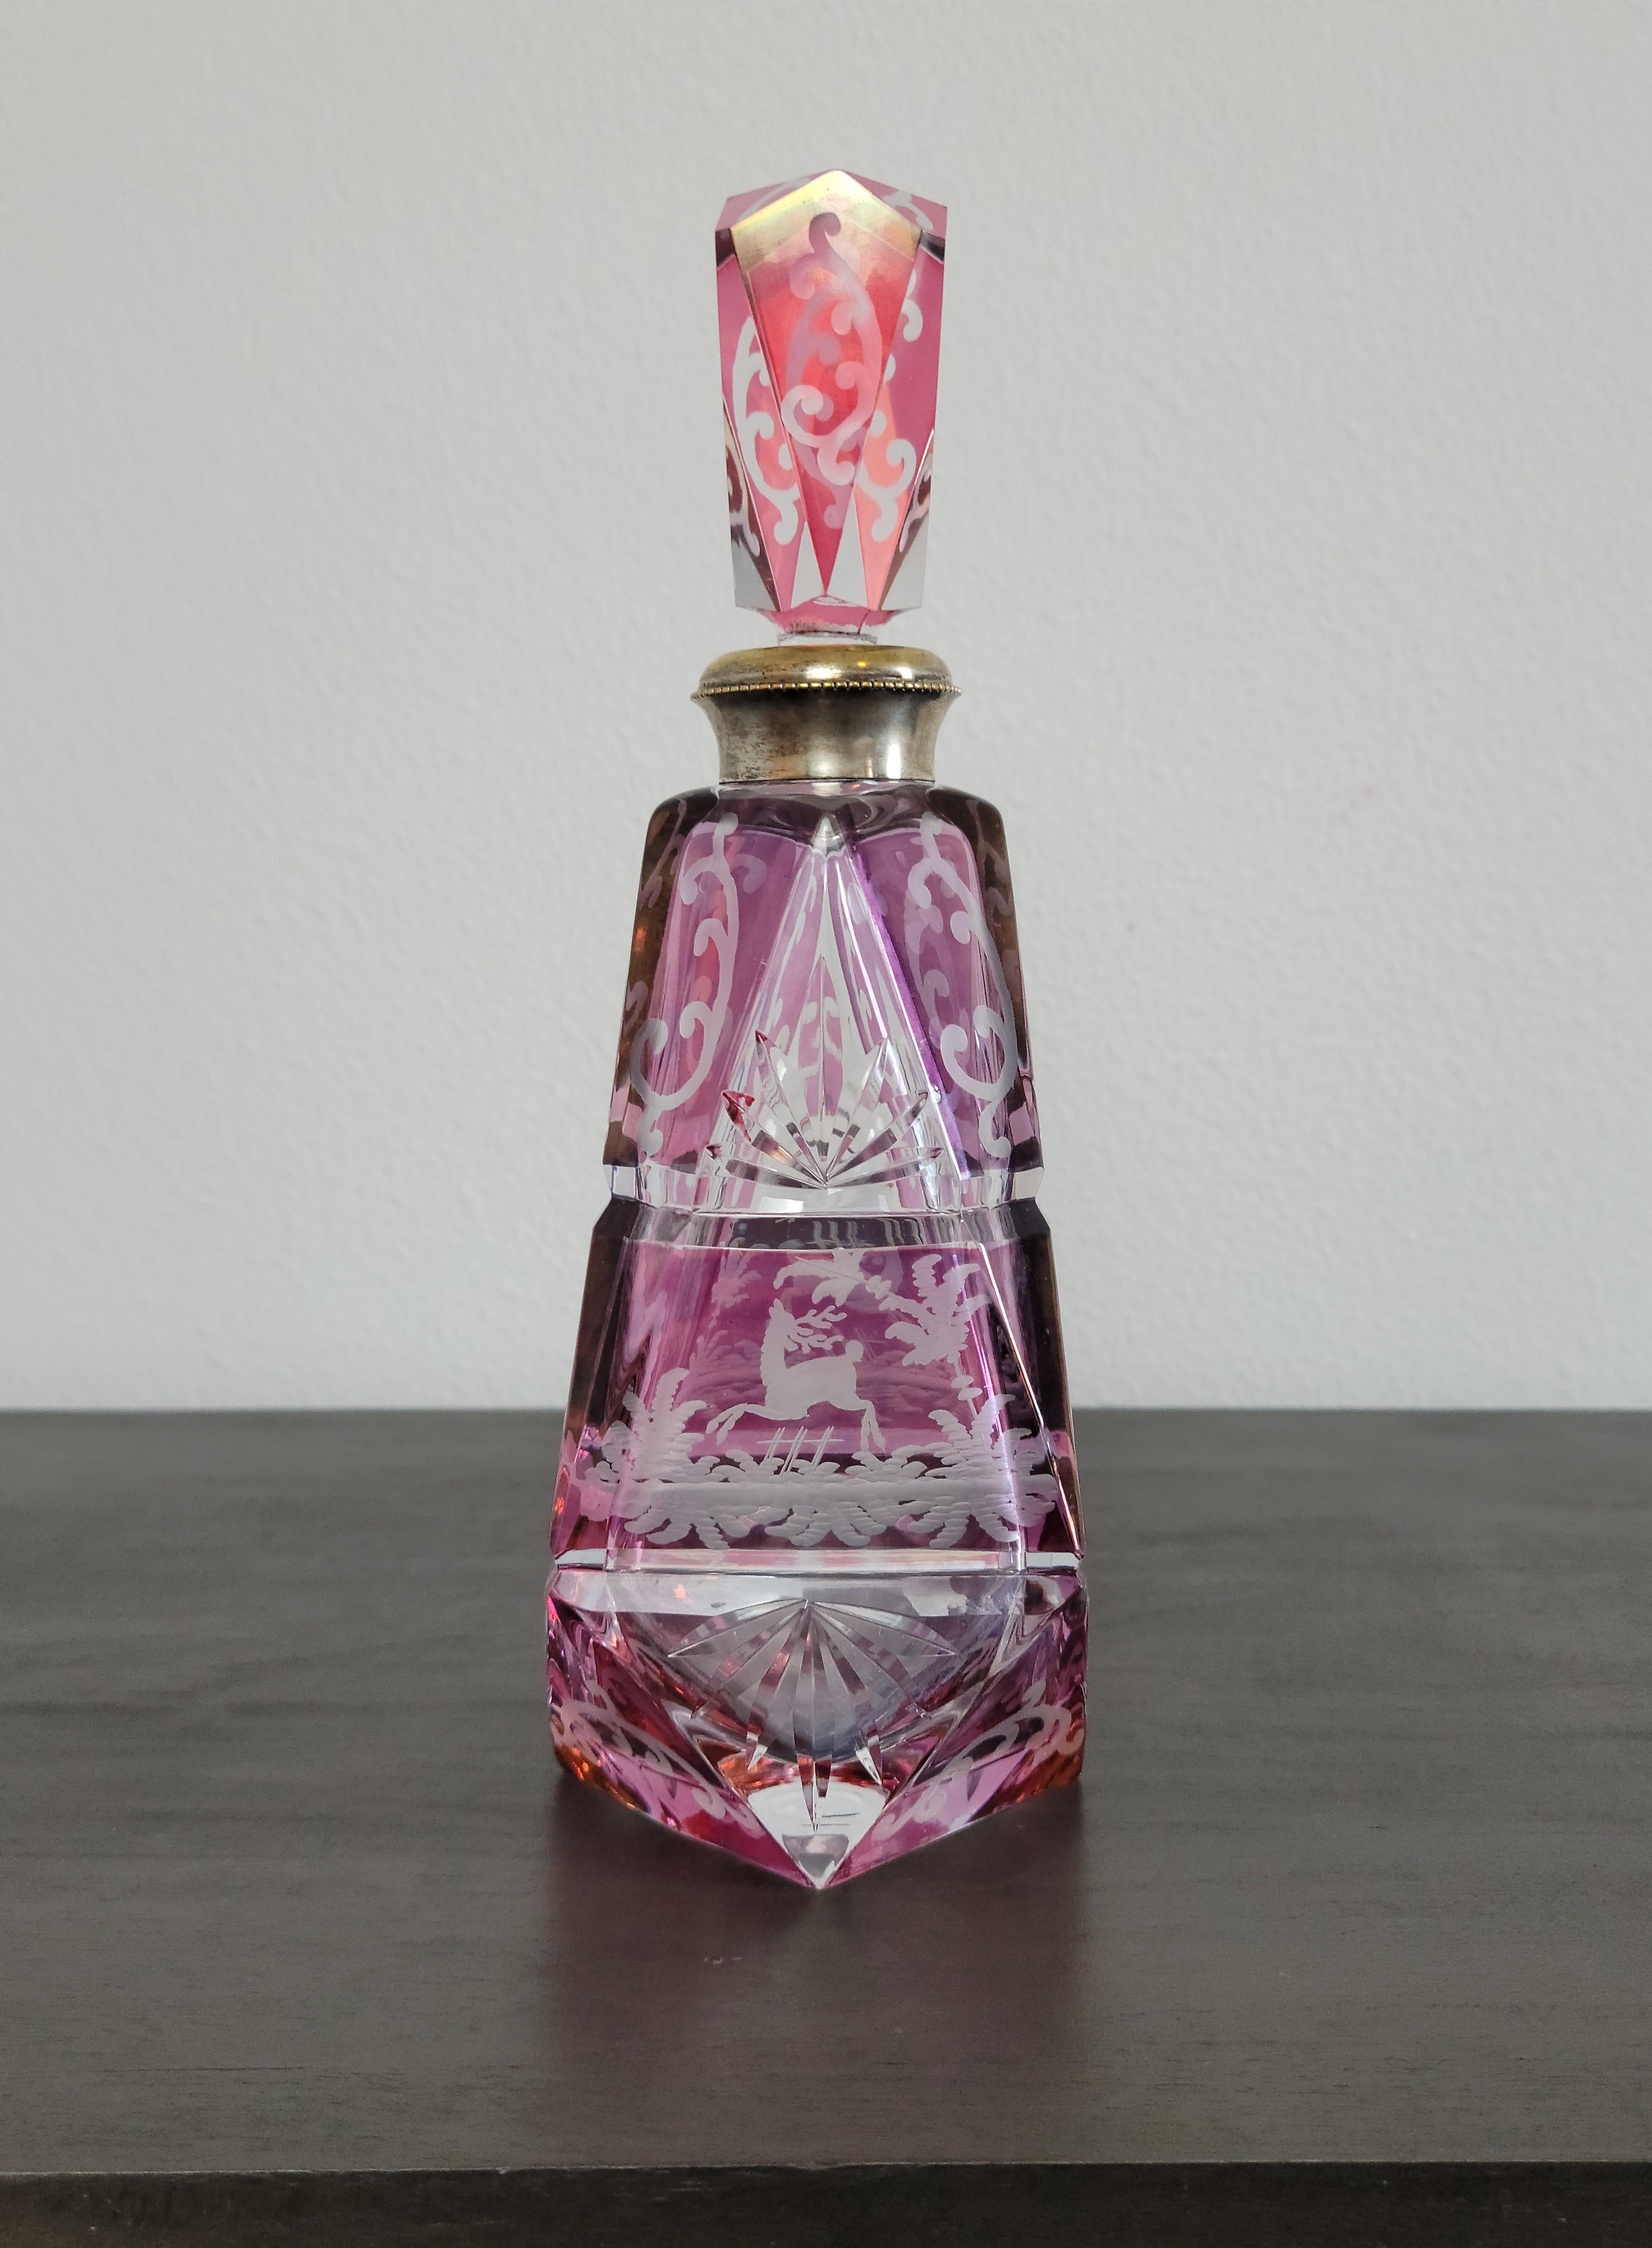 A substantial, fine quality antique Bohemian cranberry-cut-to-clear crystal decanter. 

Featuring a beautiful color combination of cranberry red / pink and colorless crystal, with stunning cut and exceptional etched decoration. 

Exquisitely